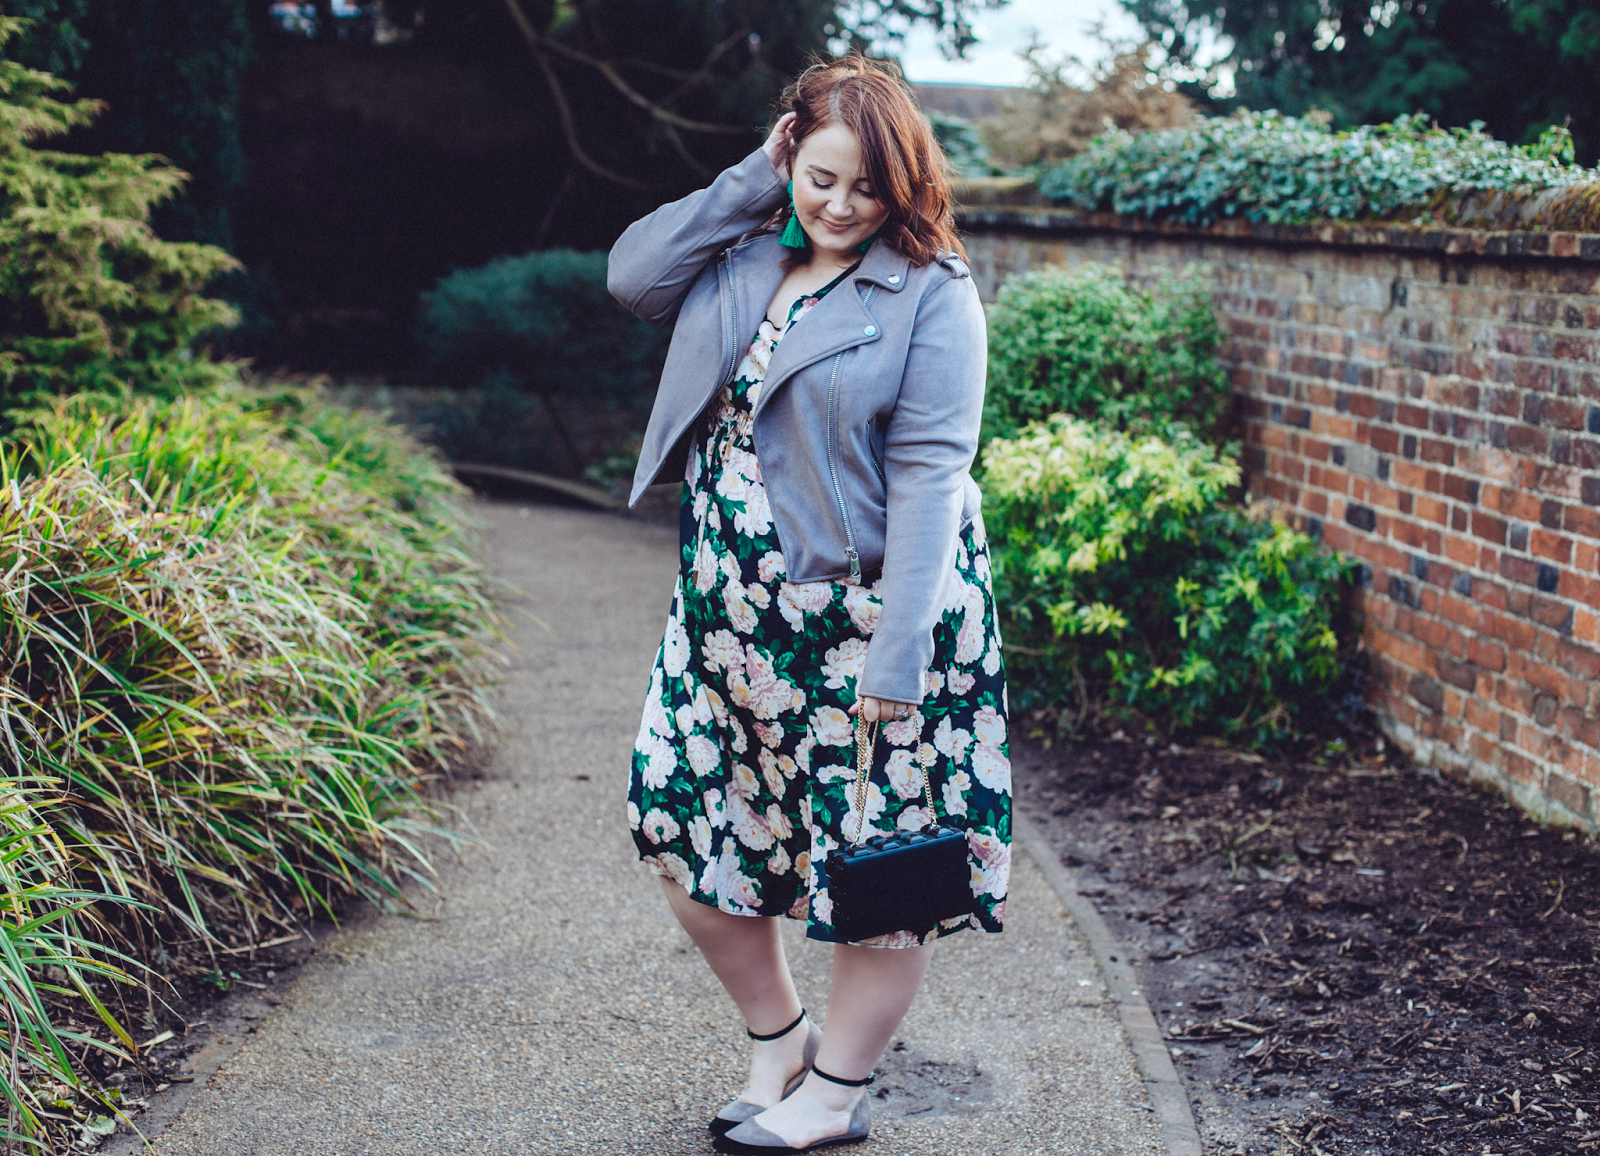 A Year Of Fashion Blogging: What It's Taught Me